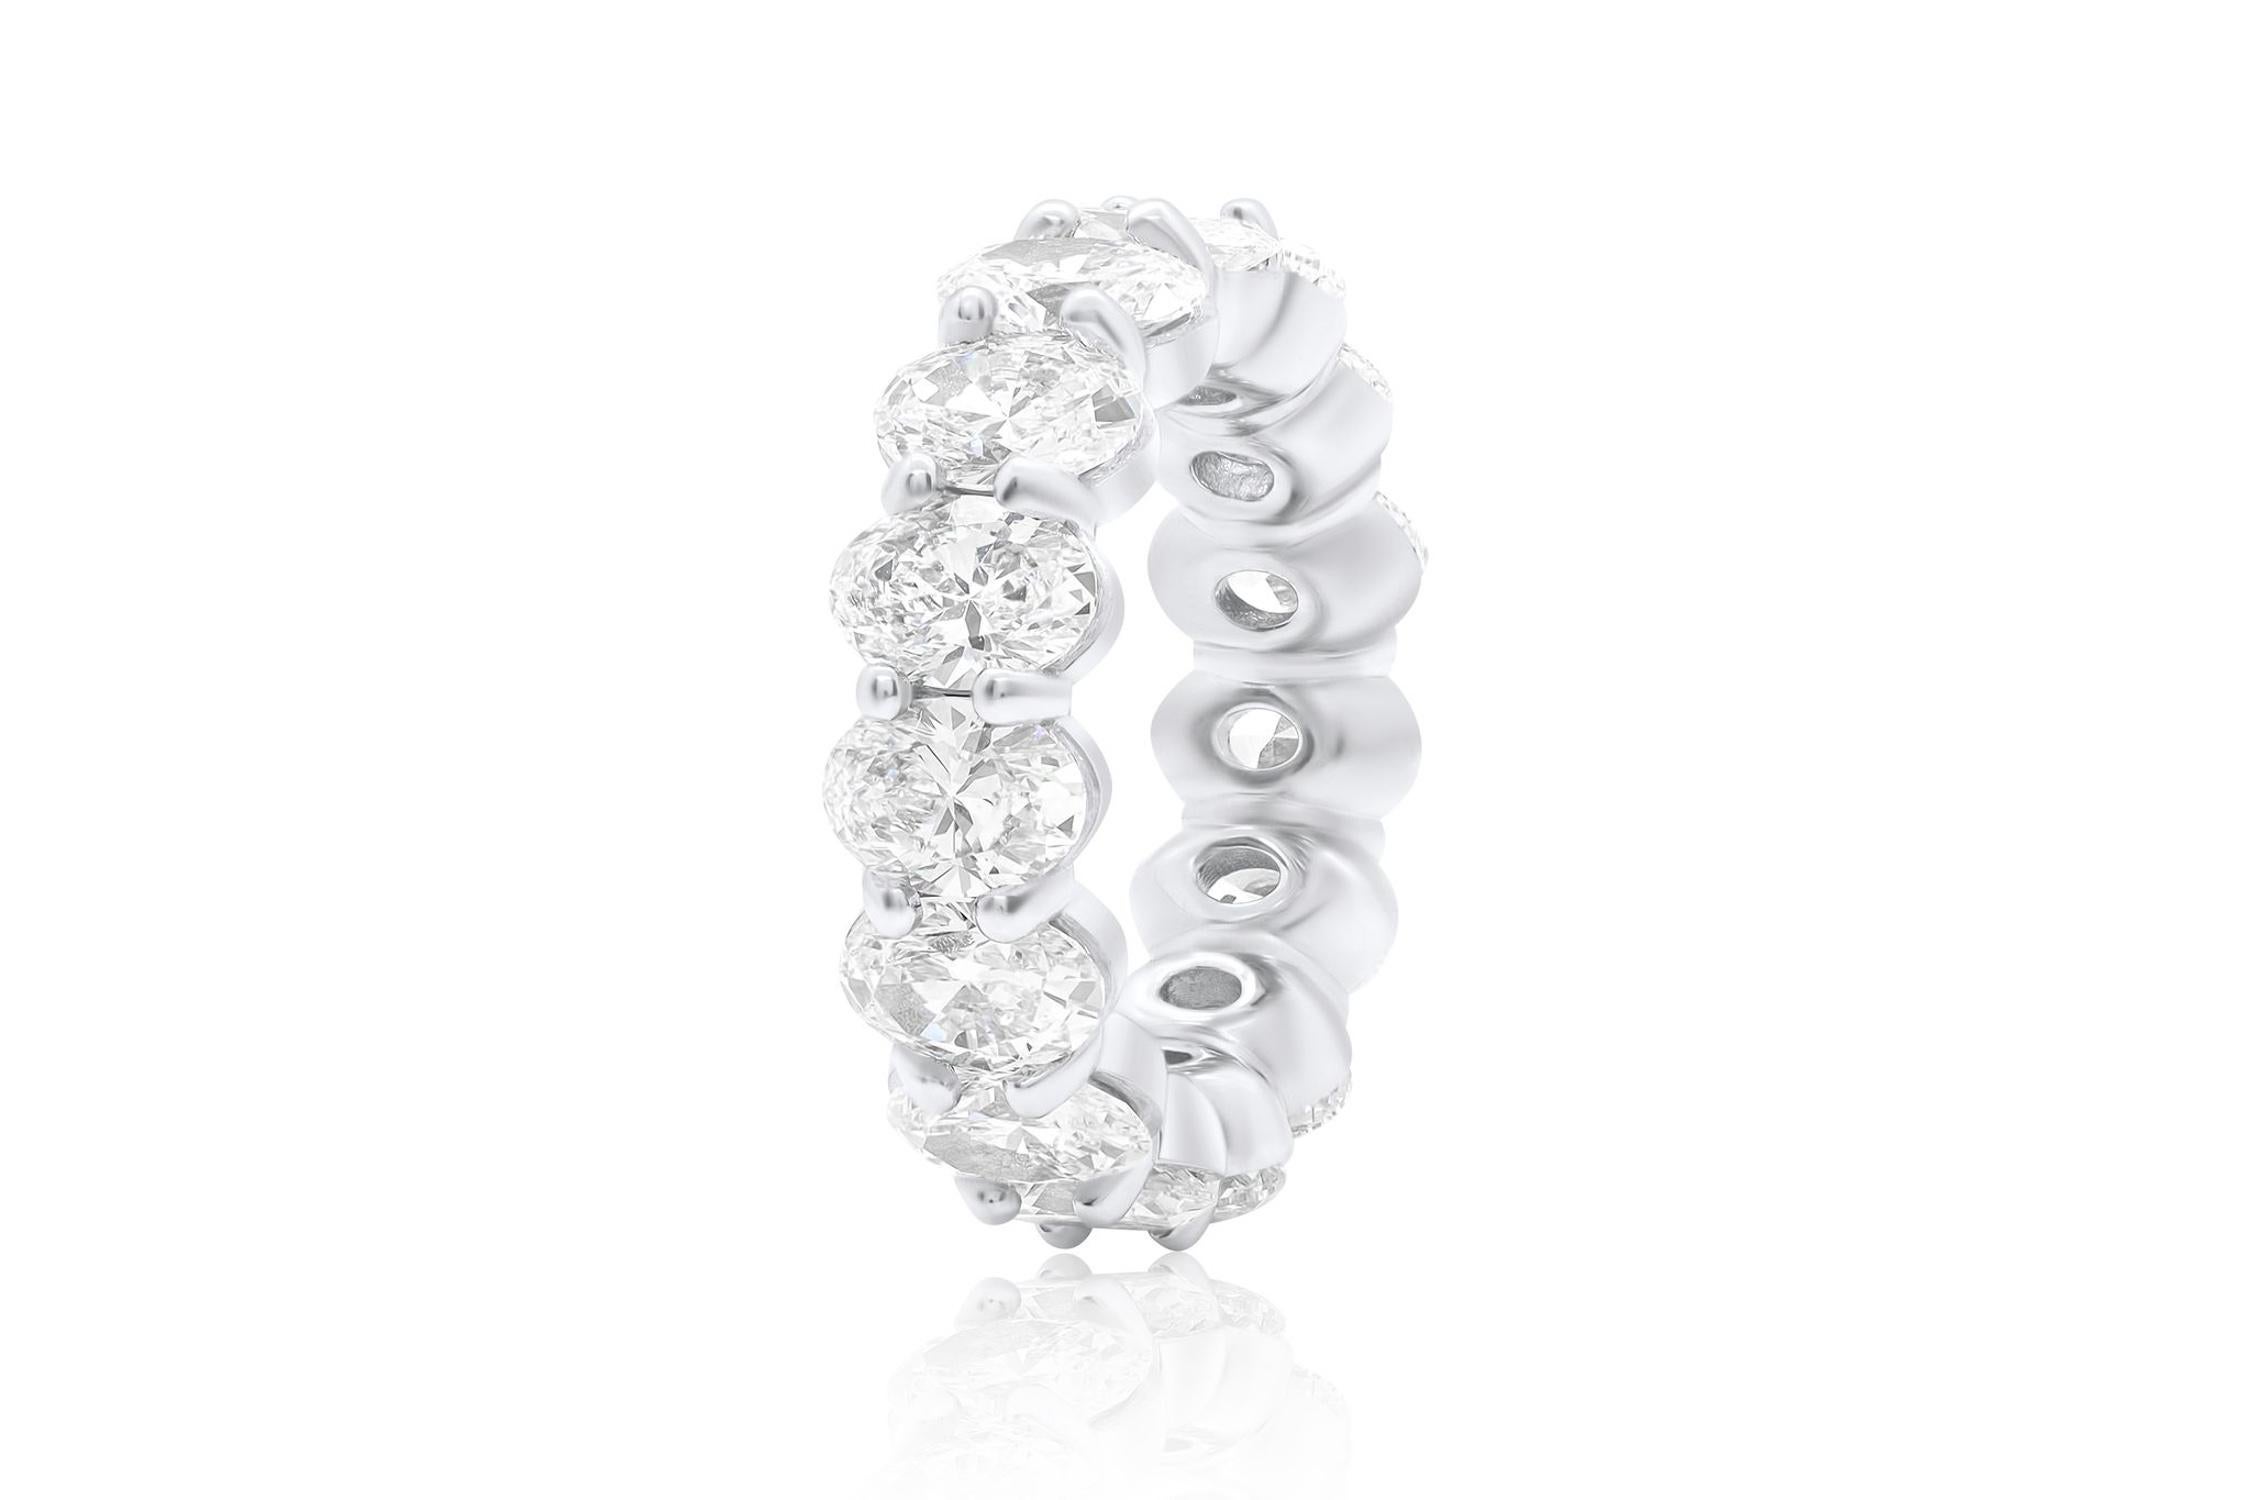 Oval Cut Diana M. PLATINUM WENDDING BAND 18 STONES TOTAL 6.15CTS  OVAL SHAPE DIAMONDS For Sale